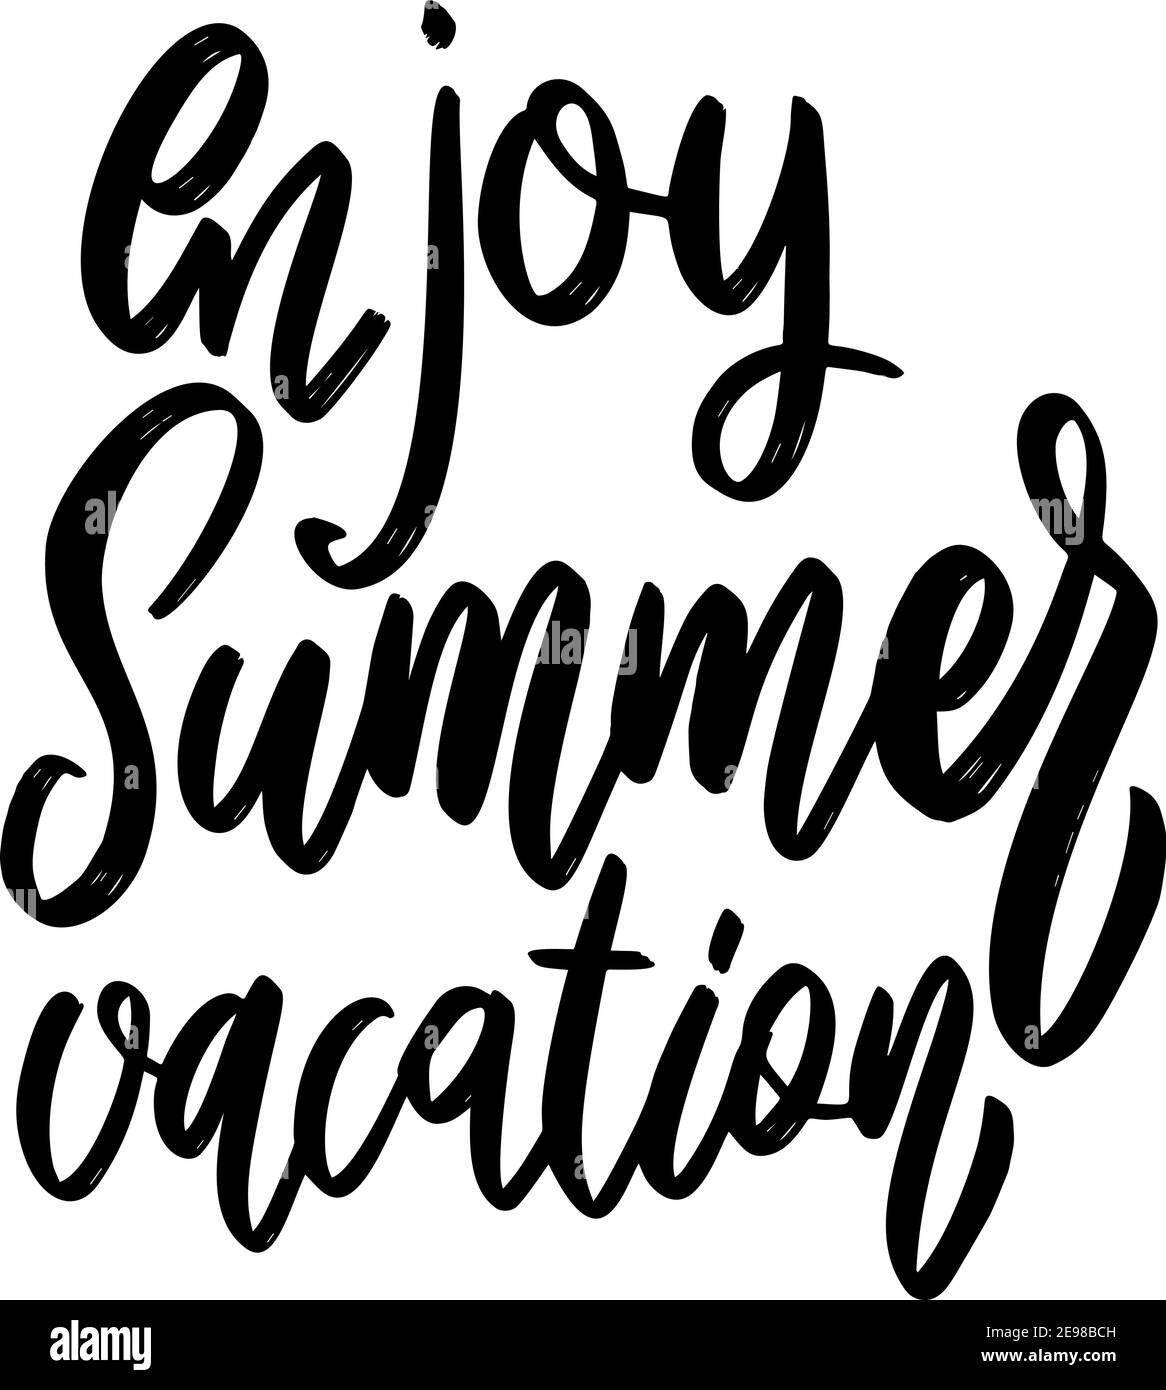 Enjoy Summer Graphic by The Svg King · Creative Fabrica